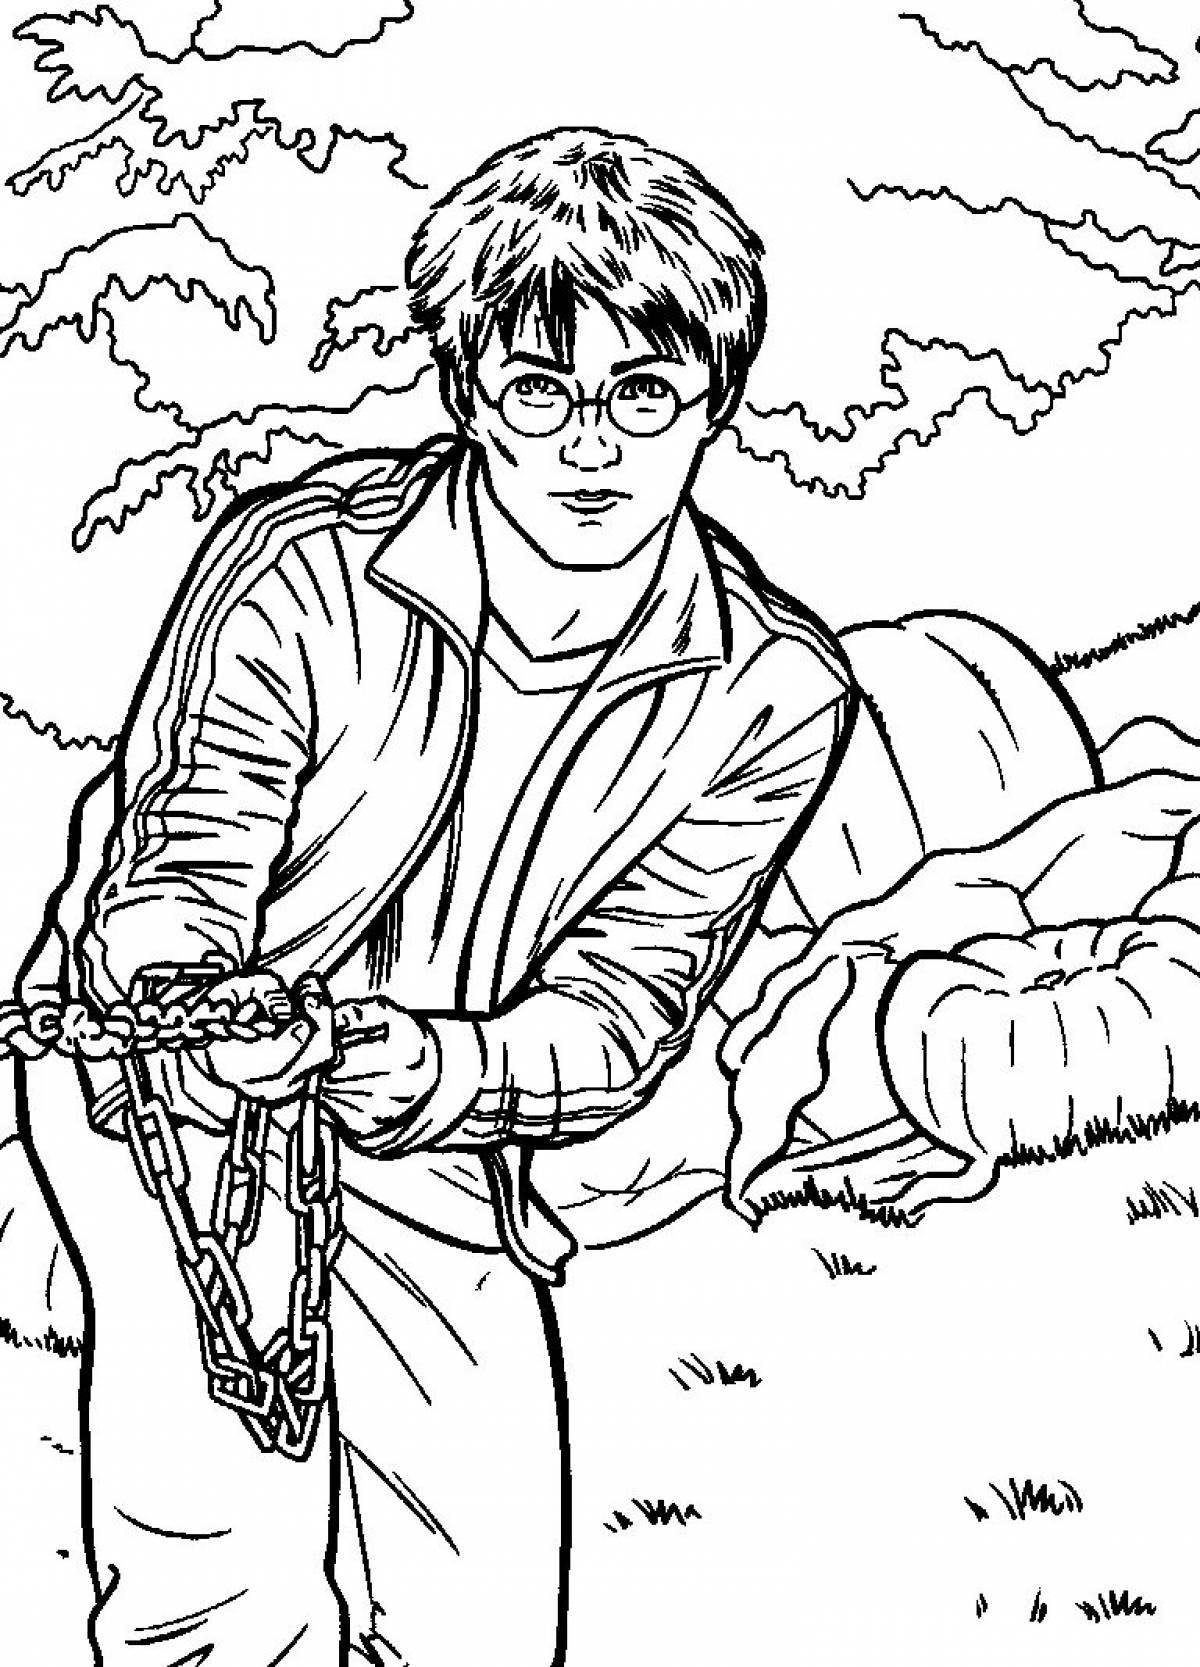 Harry potter drawing #7